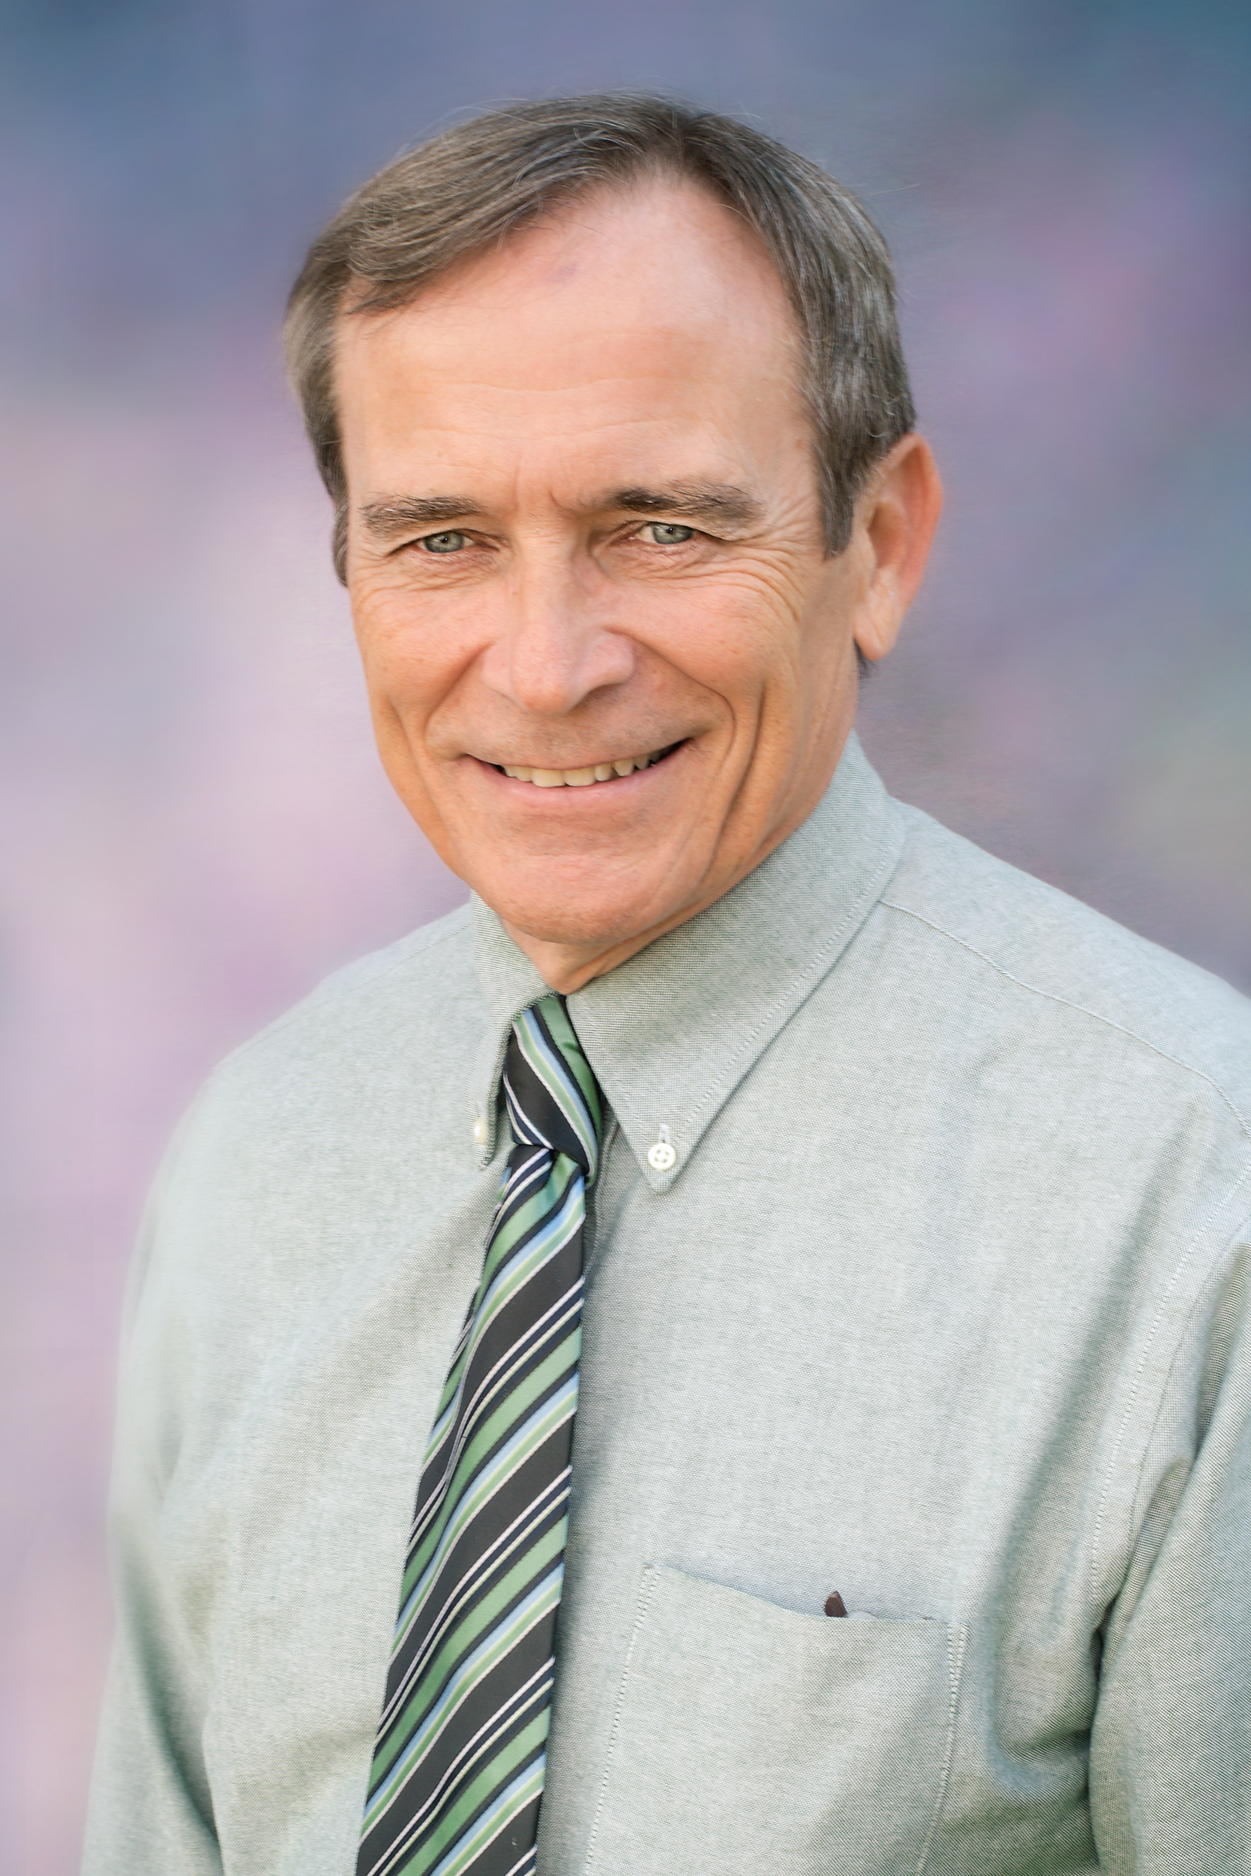 Dr. Jim Surrency